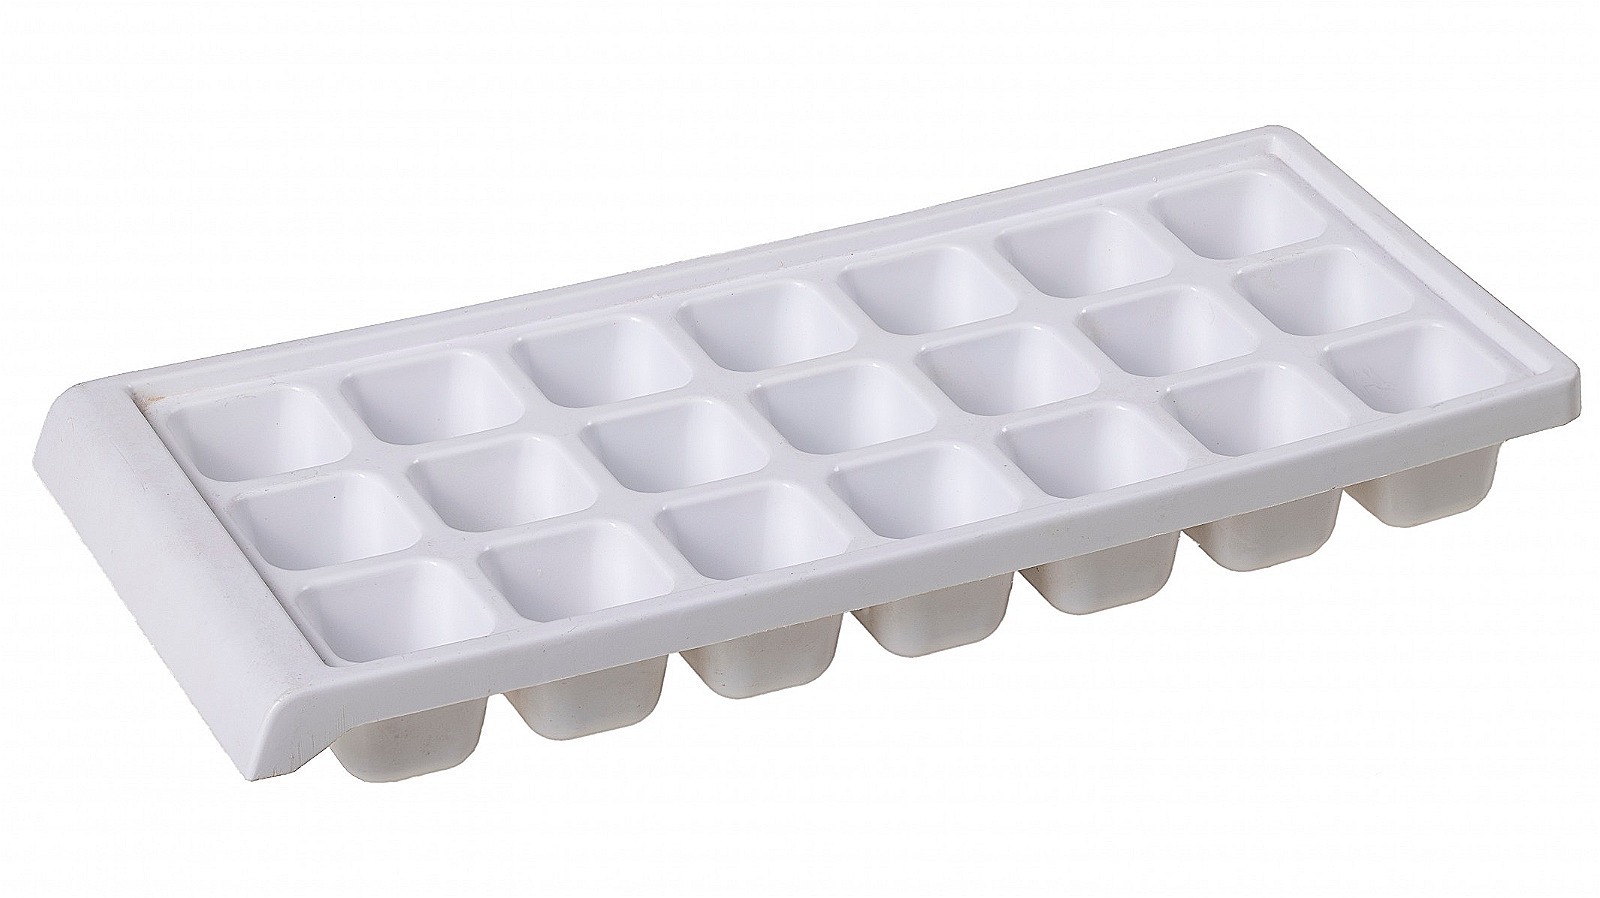 https://www.mashed.com/img/gallery/how-ice-cube-trays-can-help-you-make-ice-cream/l-intro-1657168166.jpg